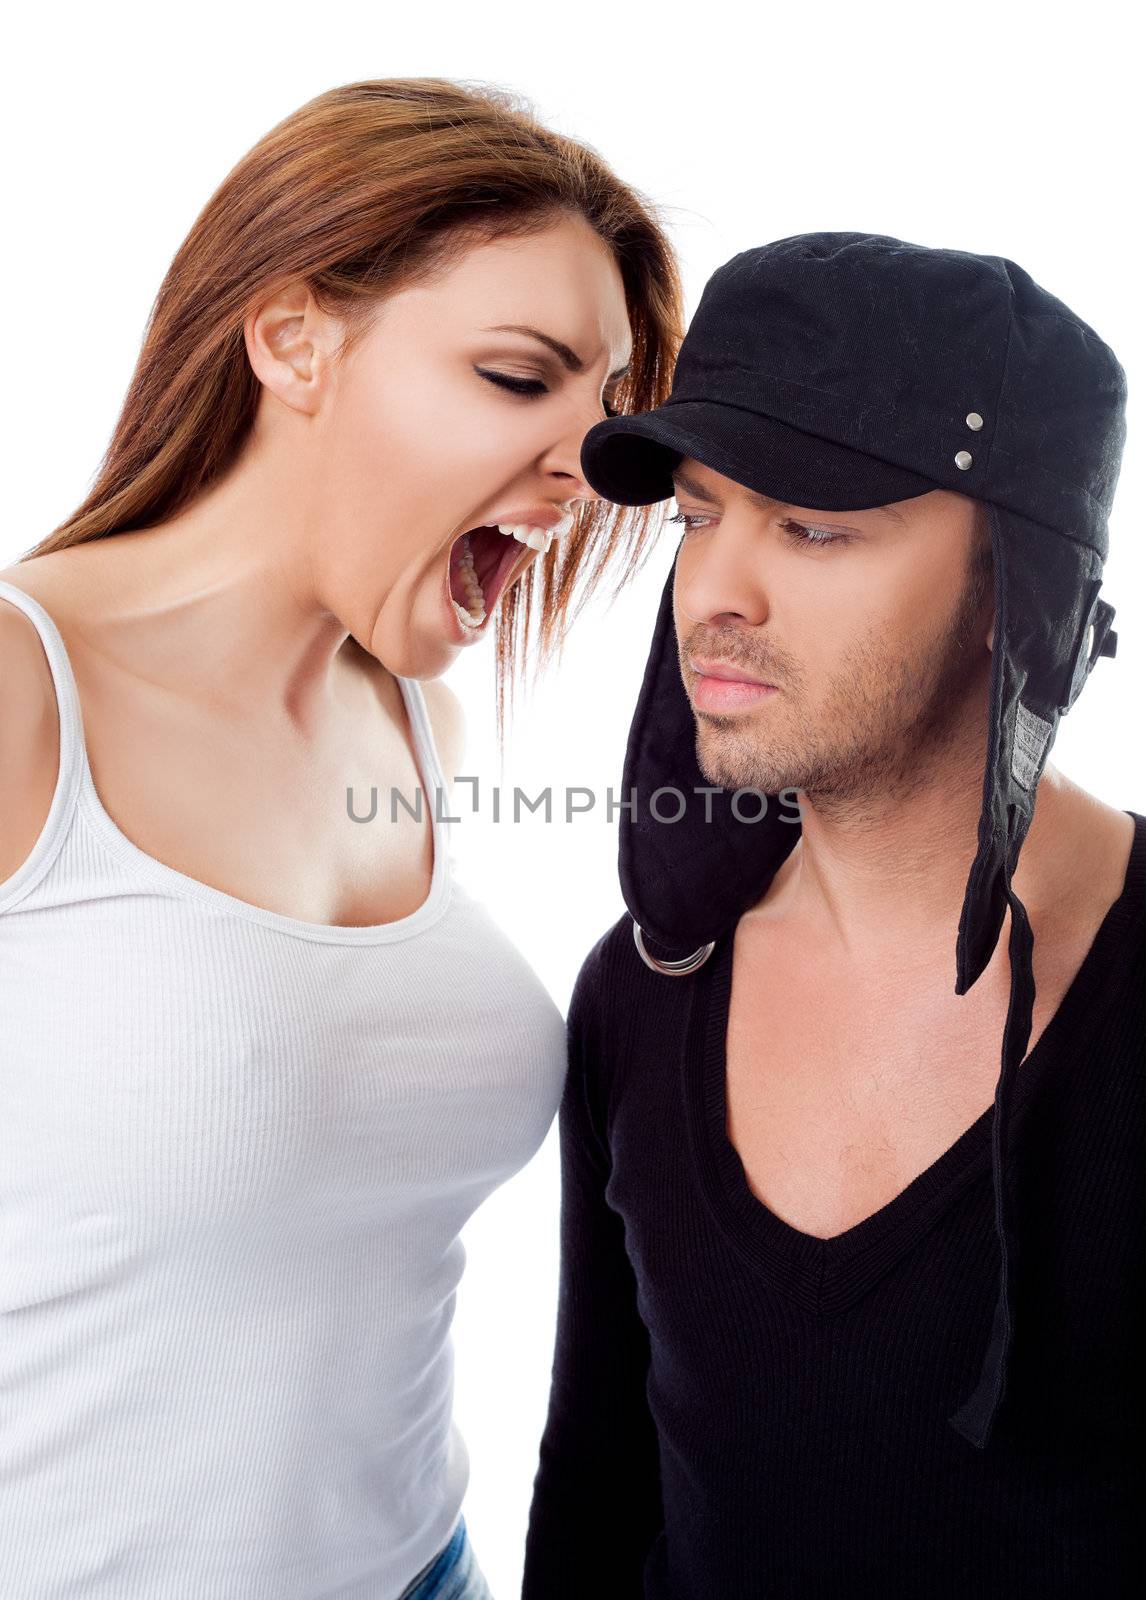 Young woman screaming at man's ear on white background